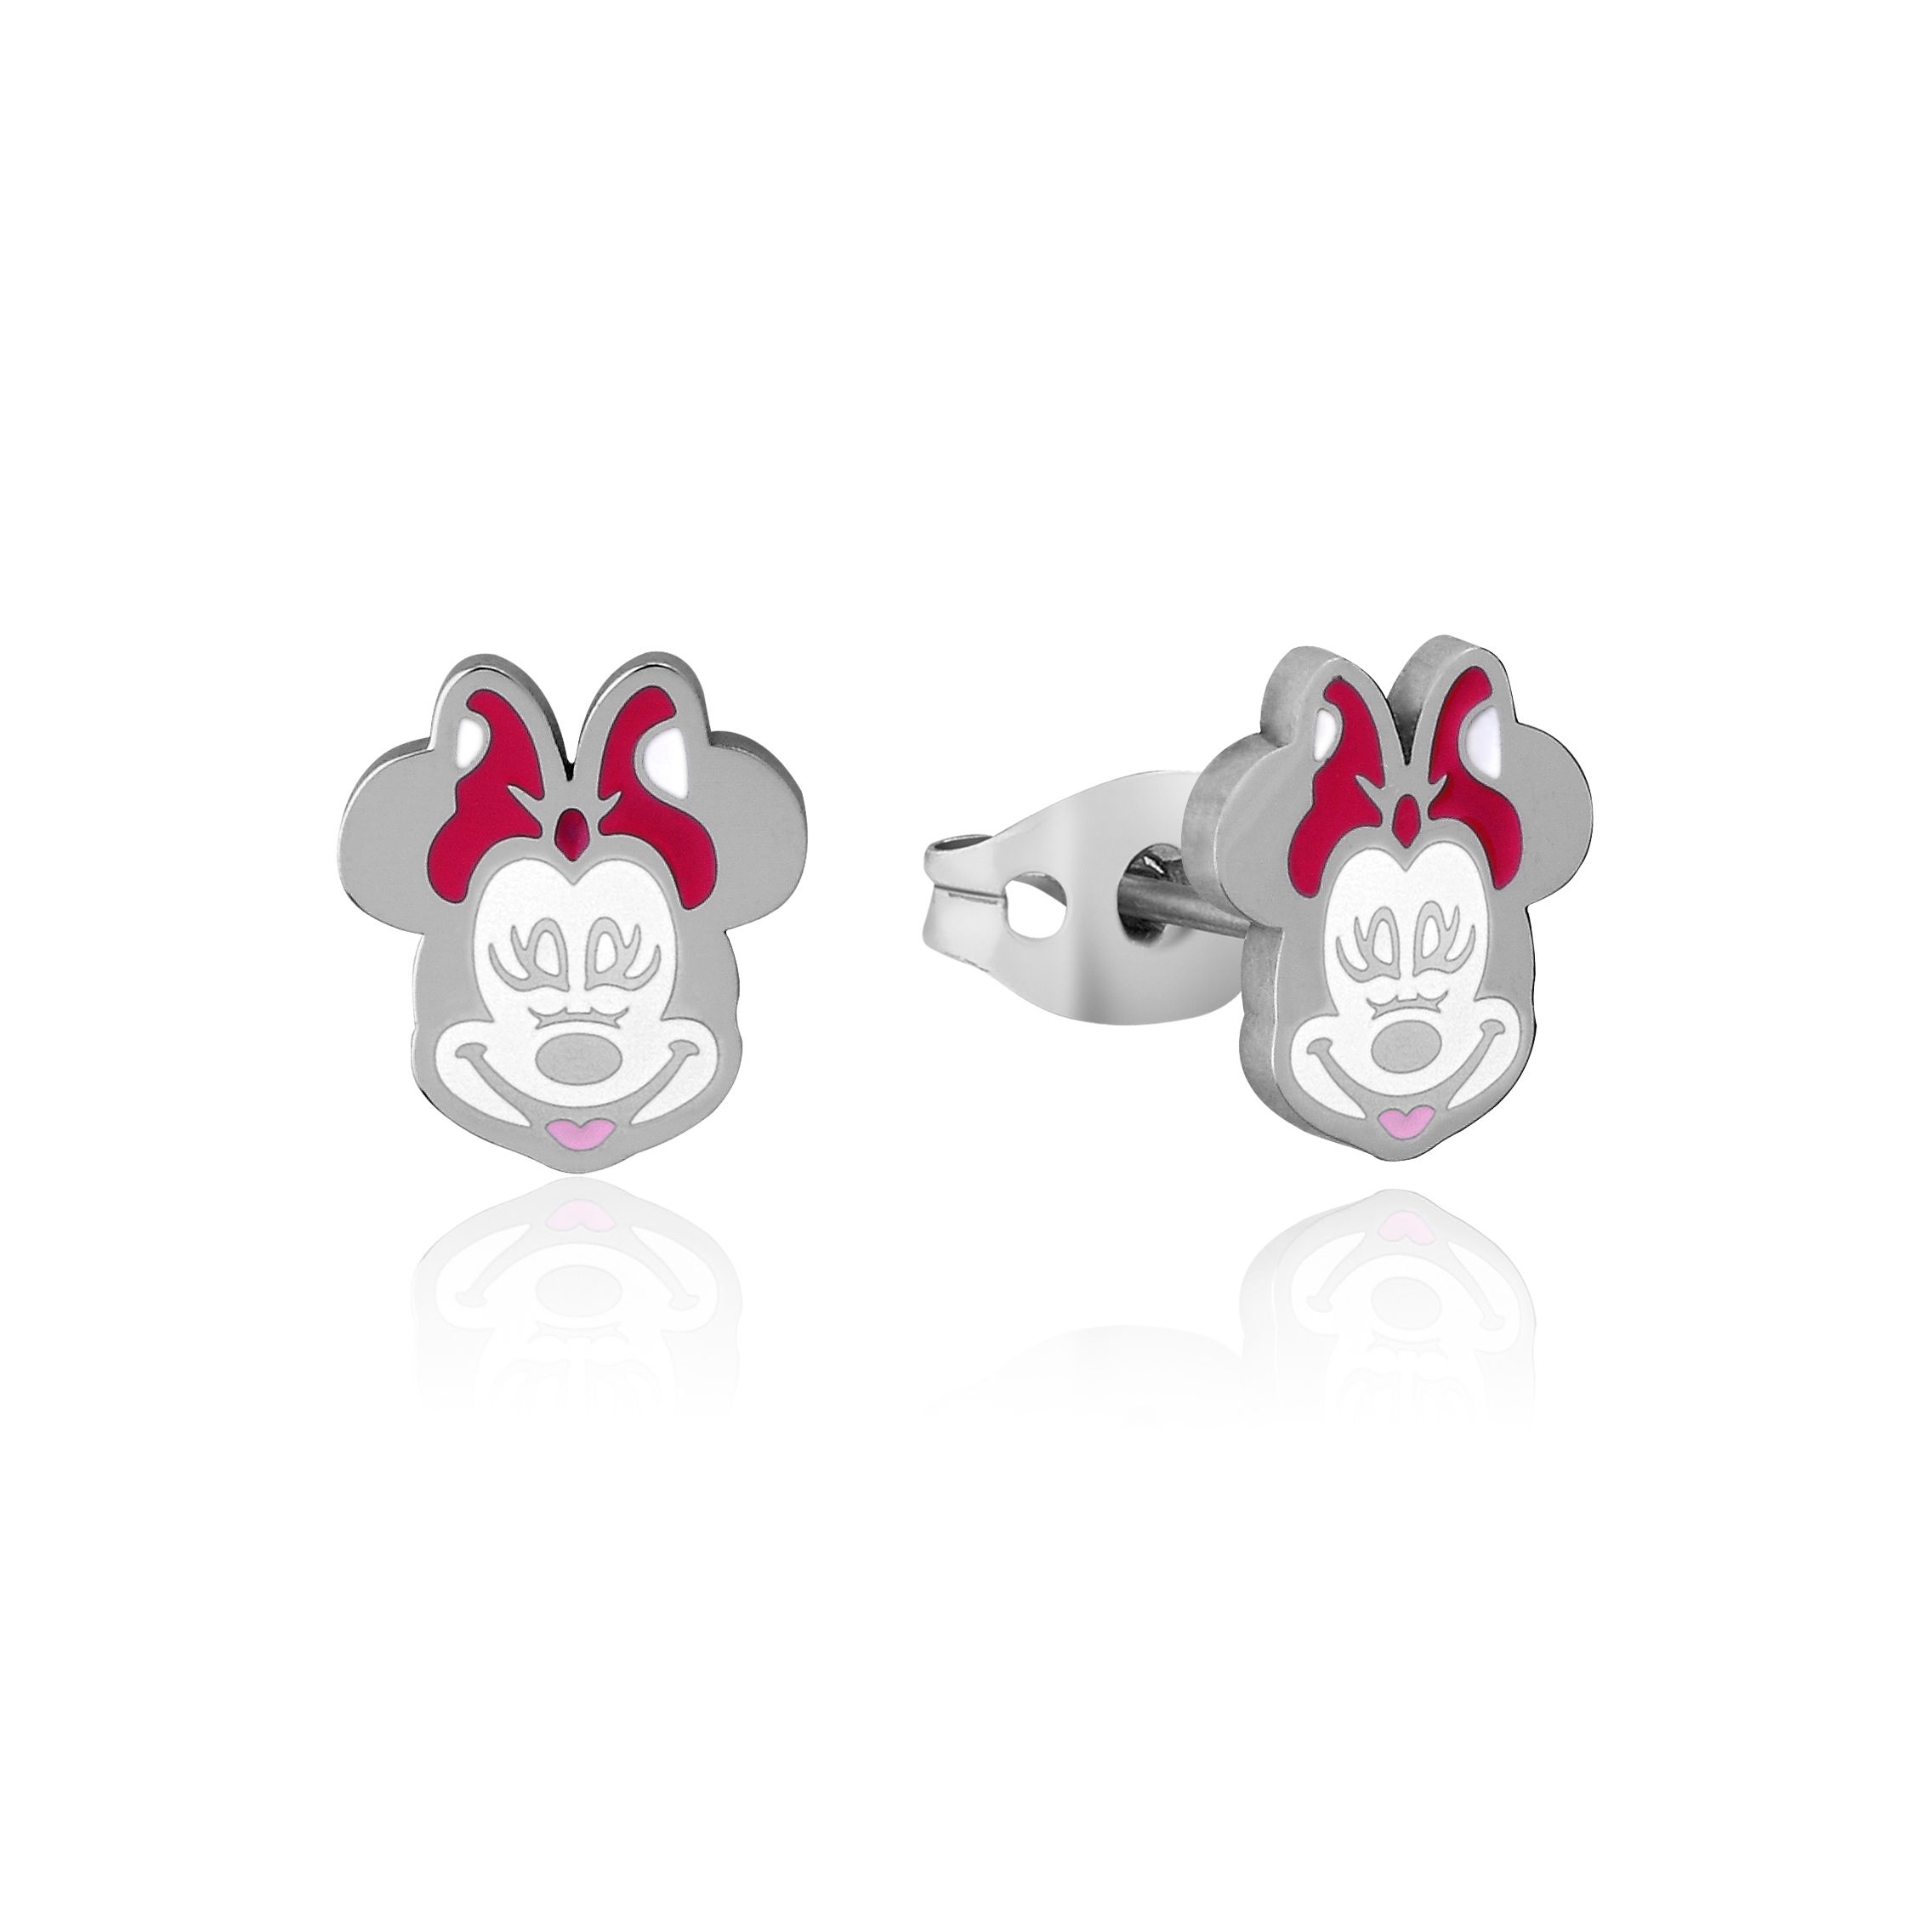 DISNEY Stainless Steel 11mm Animated Minnie Mouse Stud Earrings